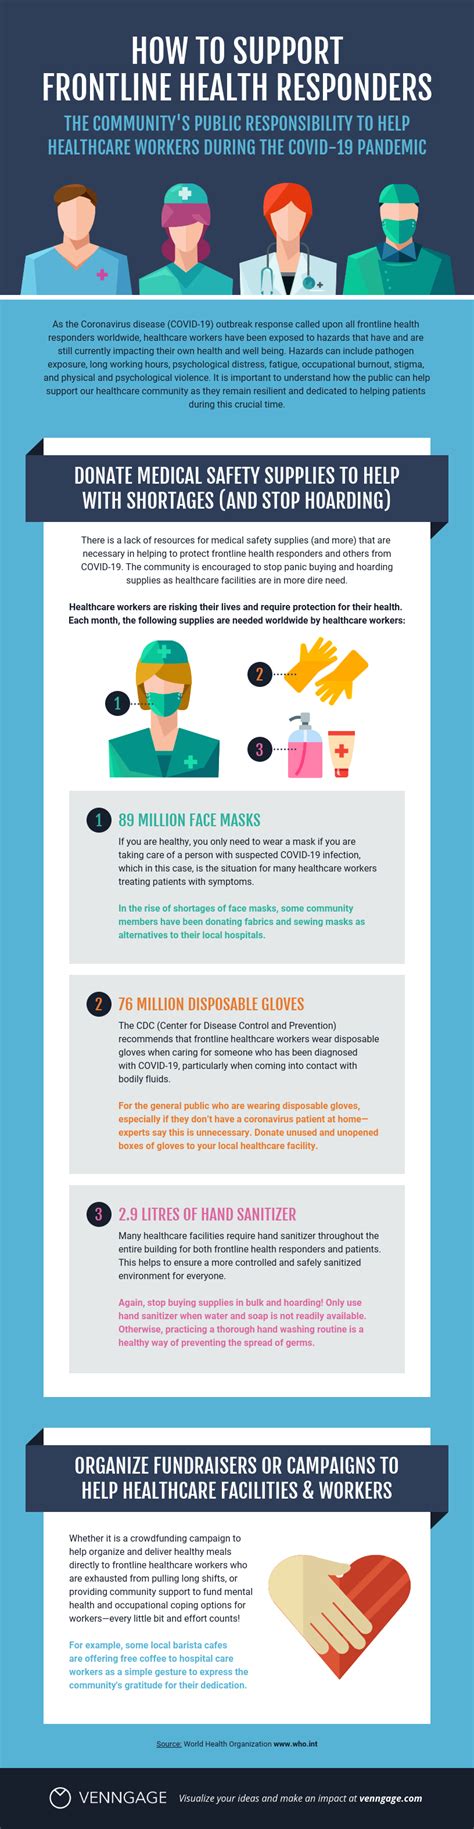 7 Easy To Edit Healthcare Infographics Templates Venngage